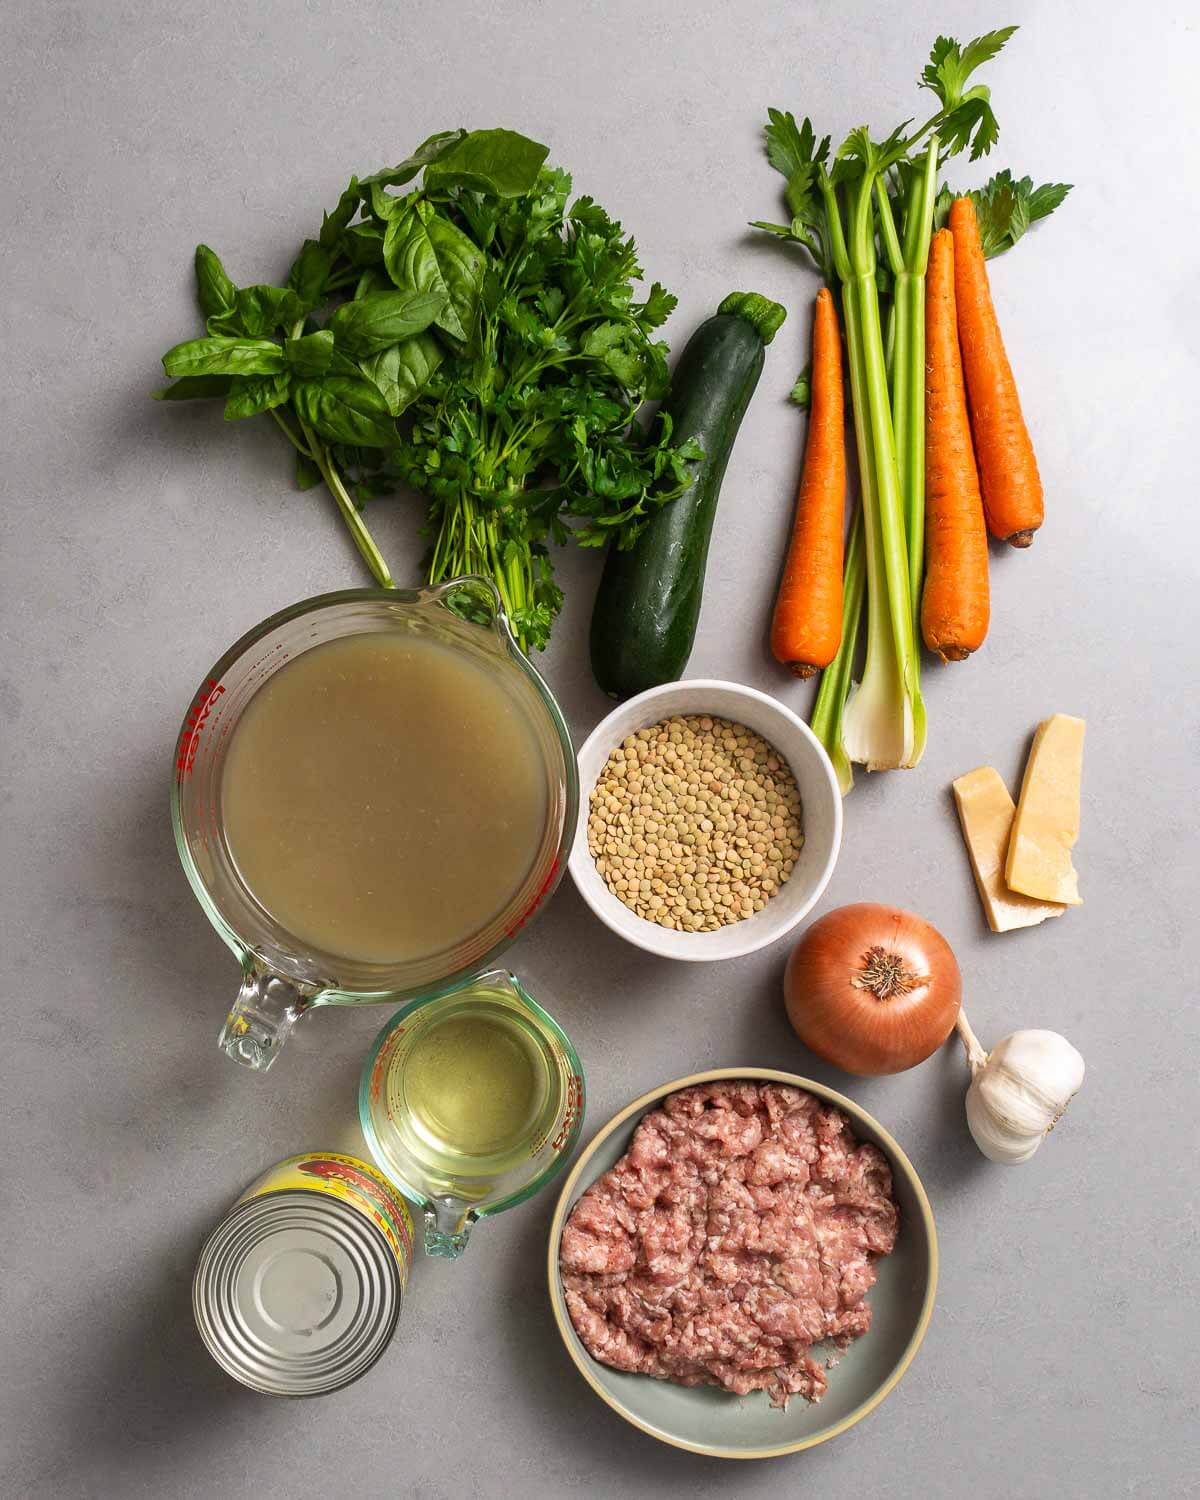 Ingredients shown: herbs, zucchini, carrots, celery, chicken stock, lentils, onion, parmesan rinds, sausage, tomatoes, garlic, and dry whtie wine.